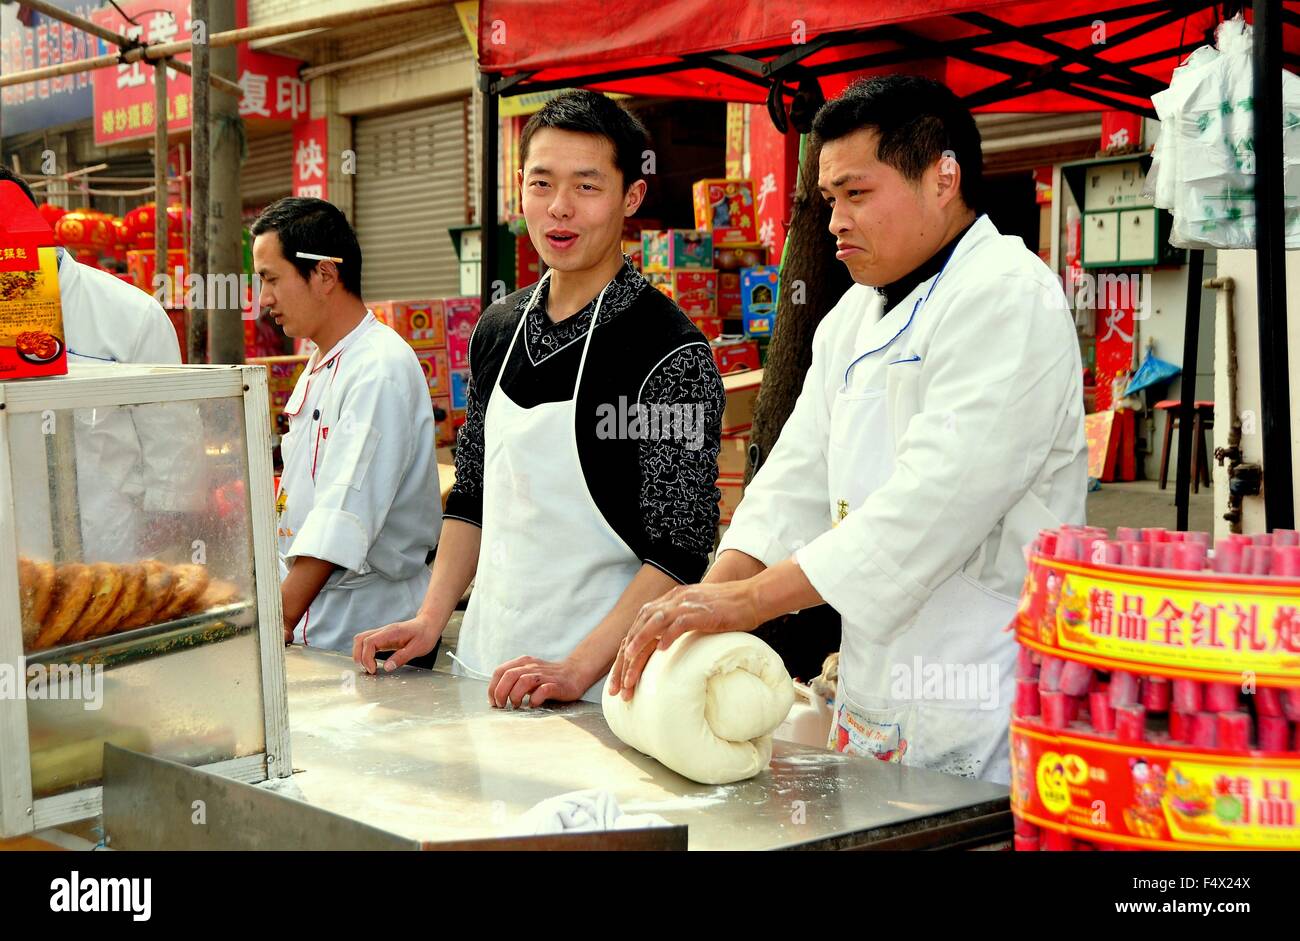 Jun Le, China: Chefs kneading dough and preparing the famous Jun Le Chinese Pizzas, a tasty local pastry Stock Photo